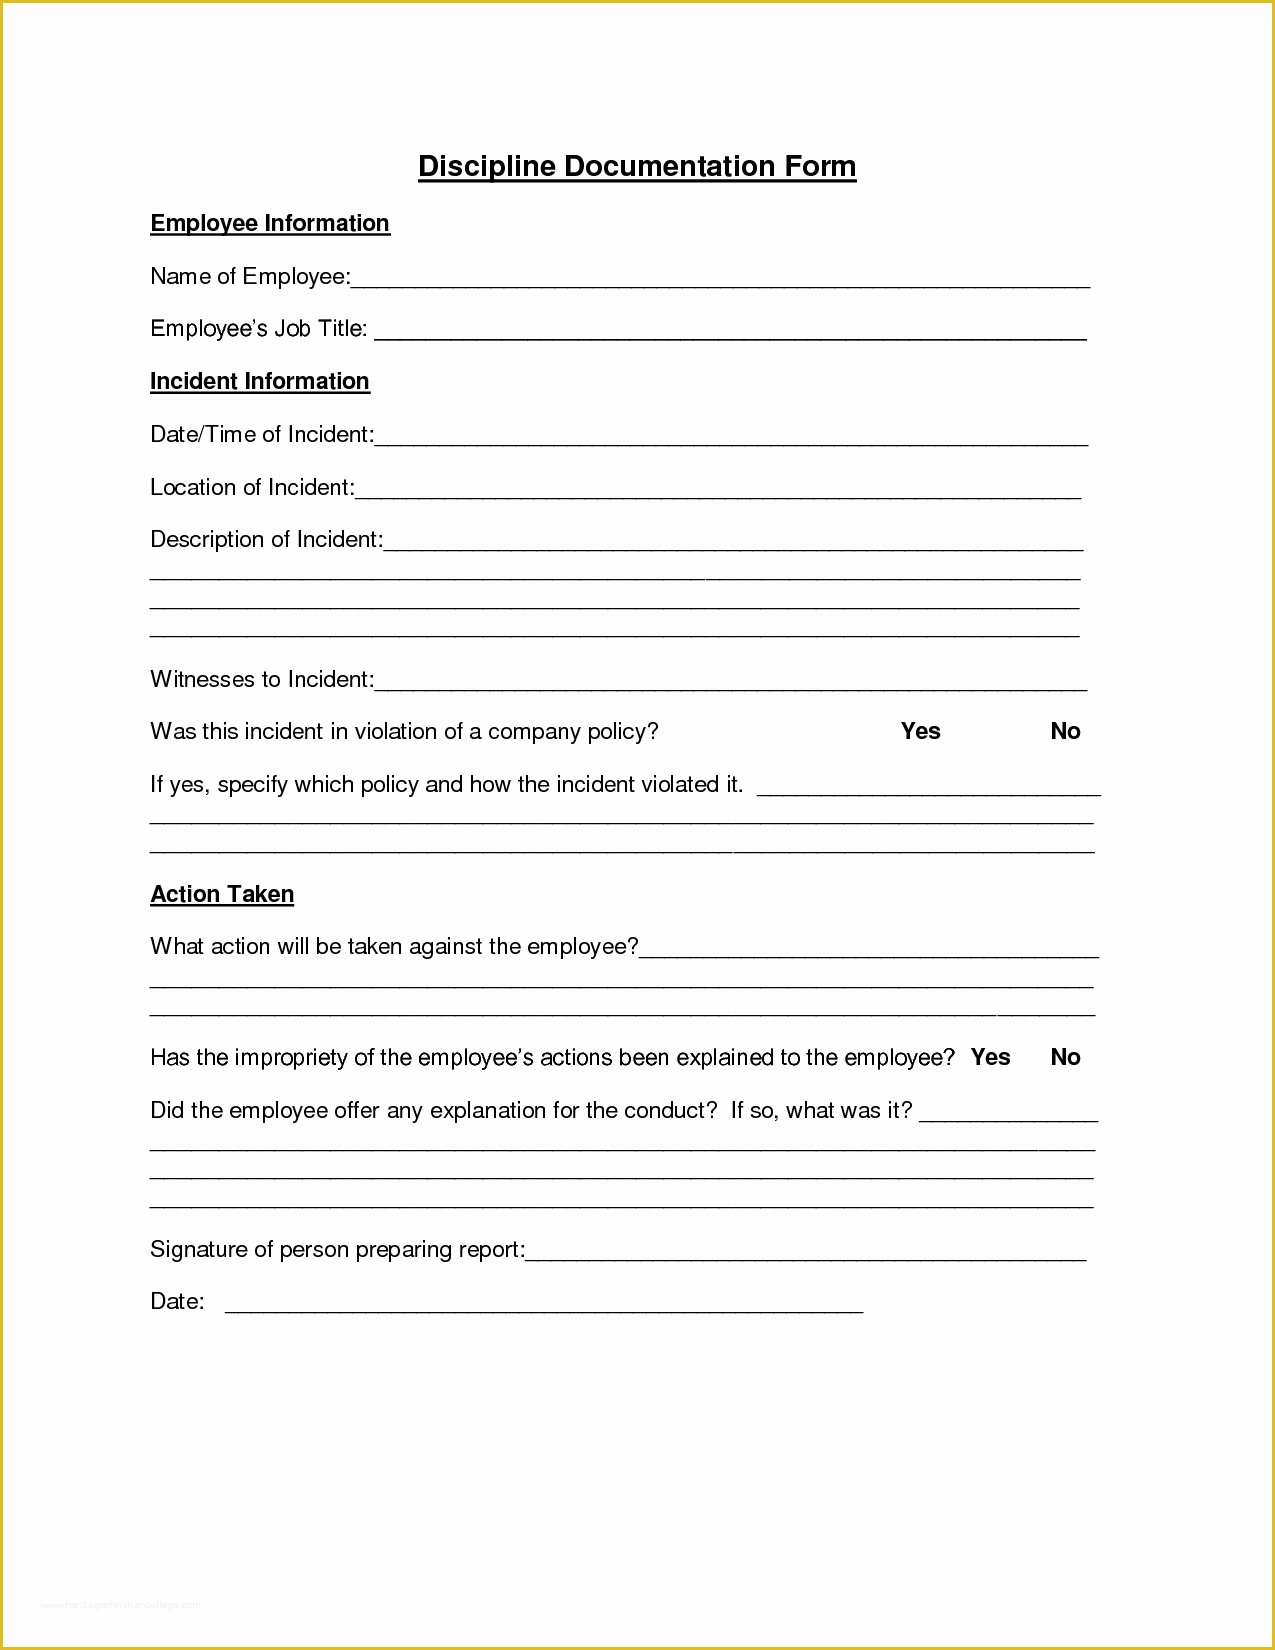 Employee Performance Agreement Template Free Of Employee Discipline form